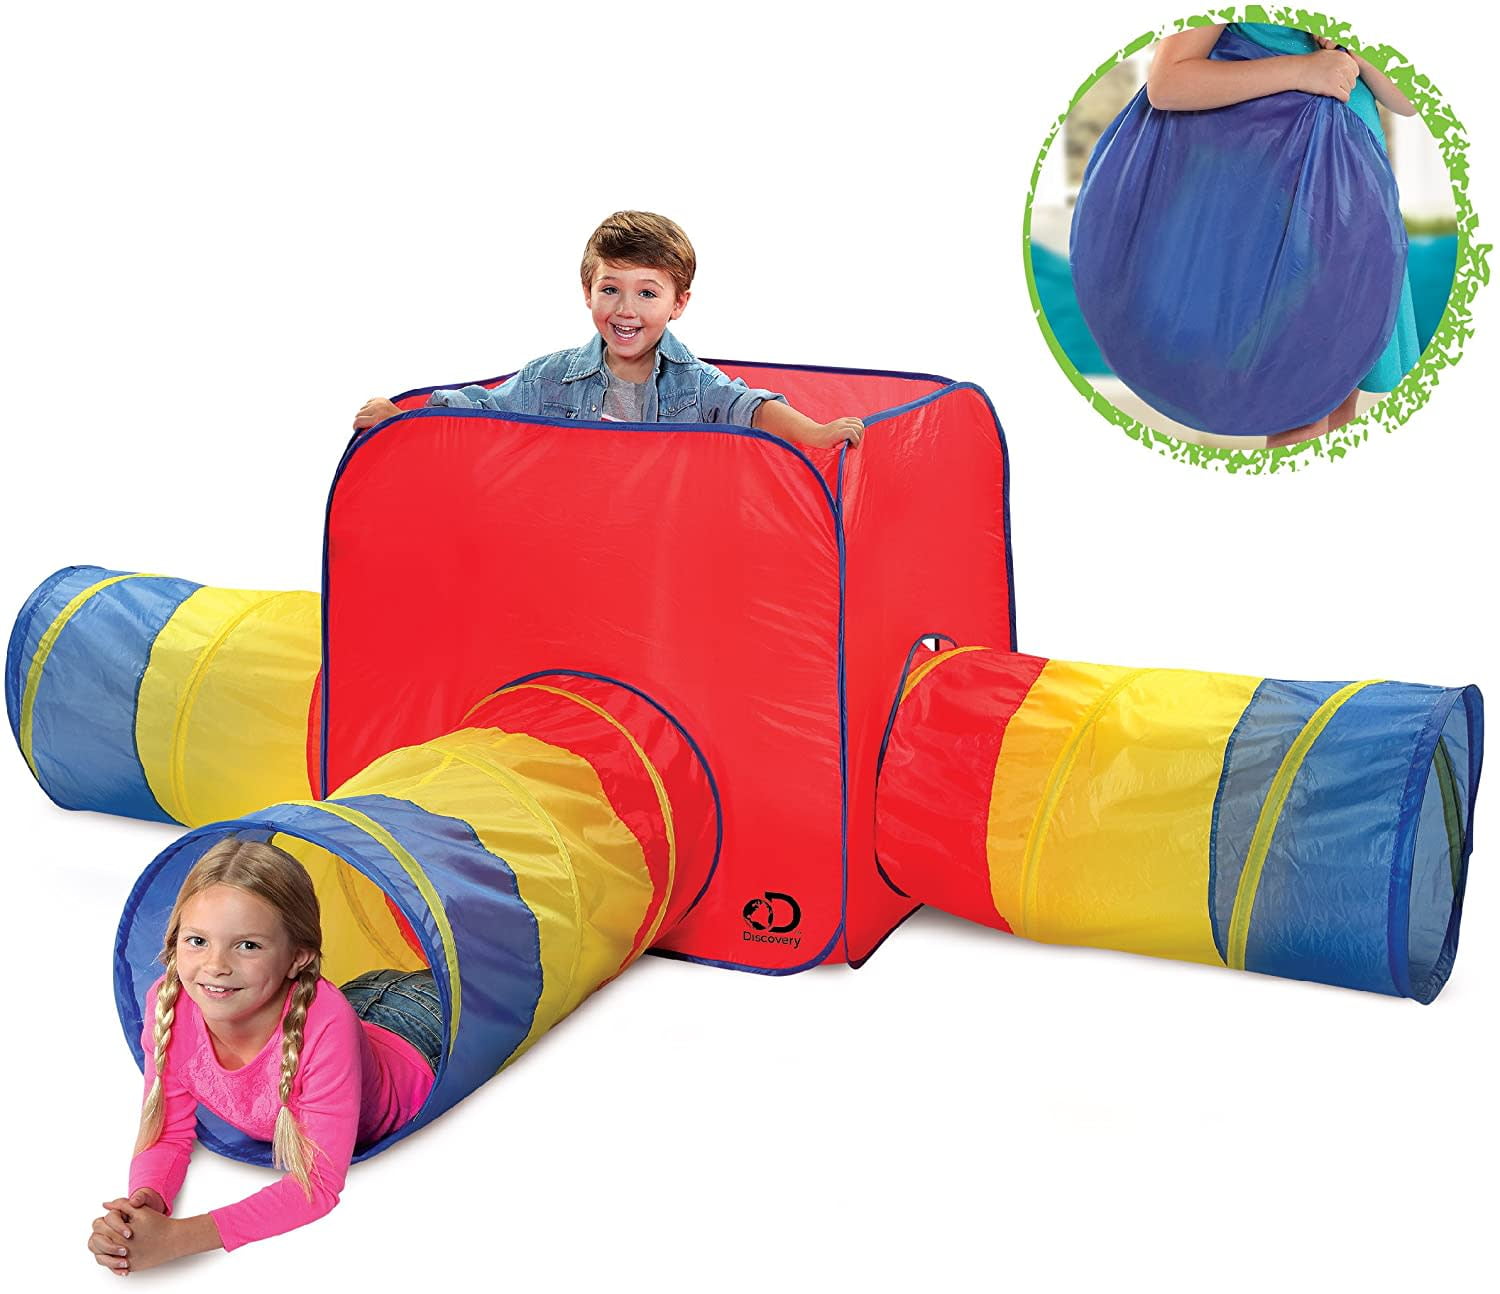 and Dogs NEW 6-ft Play Tunnel Great For Kids Children FREE SHIPPING! Cats 